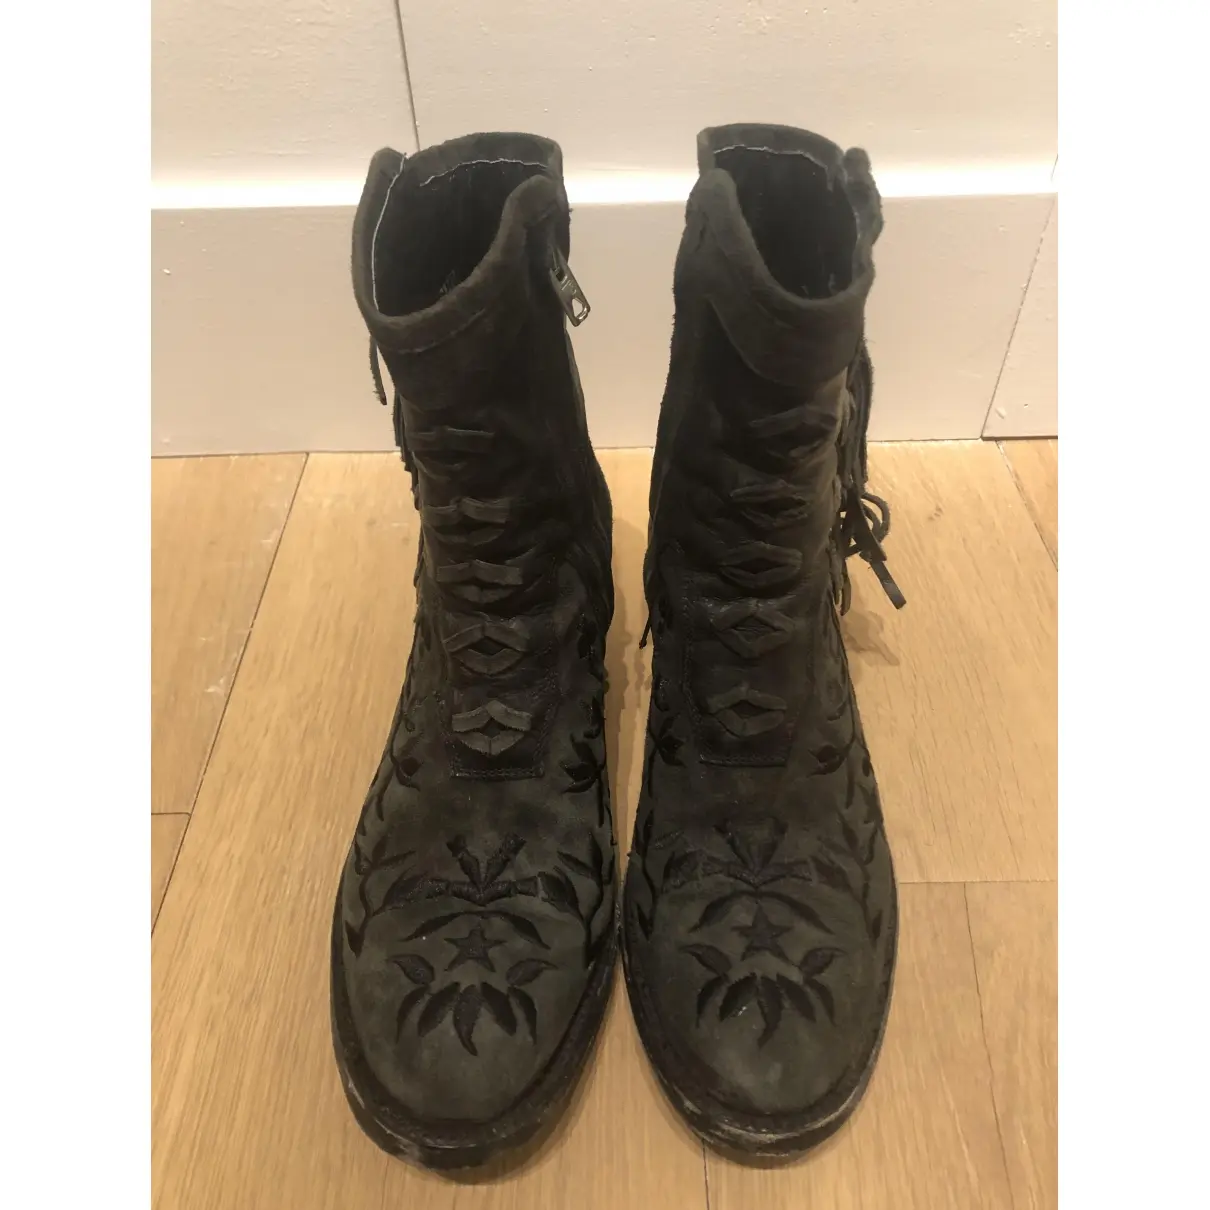 Mexicana Western boots for sale